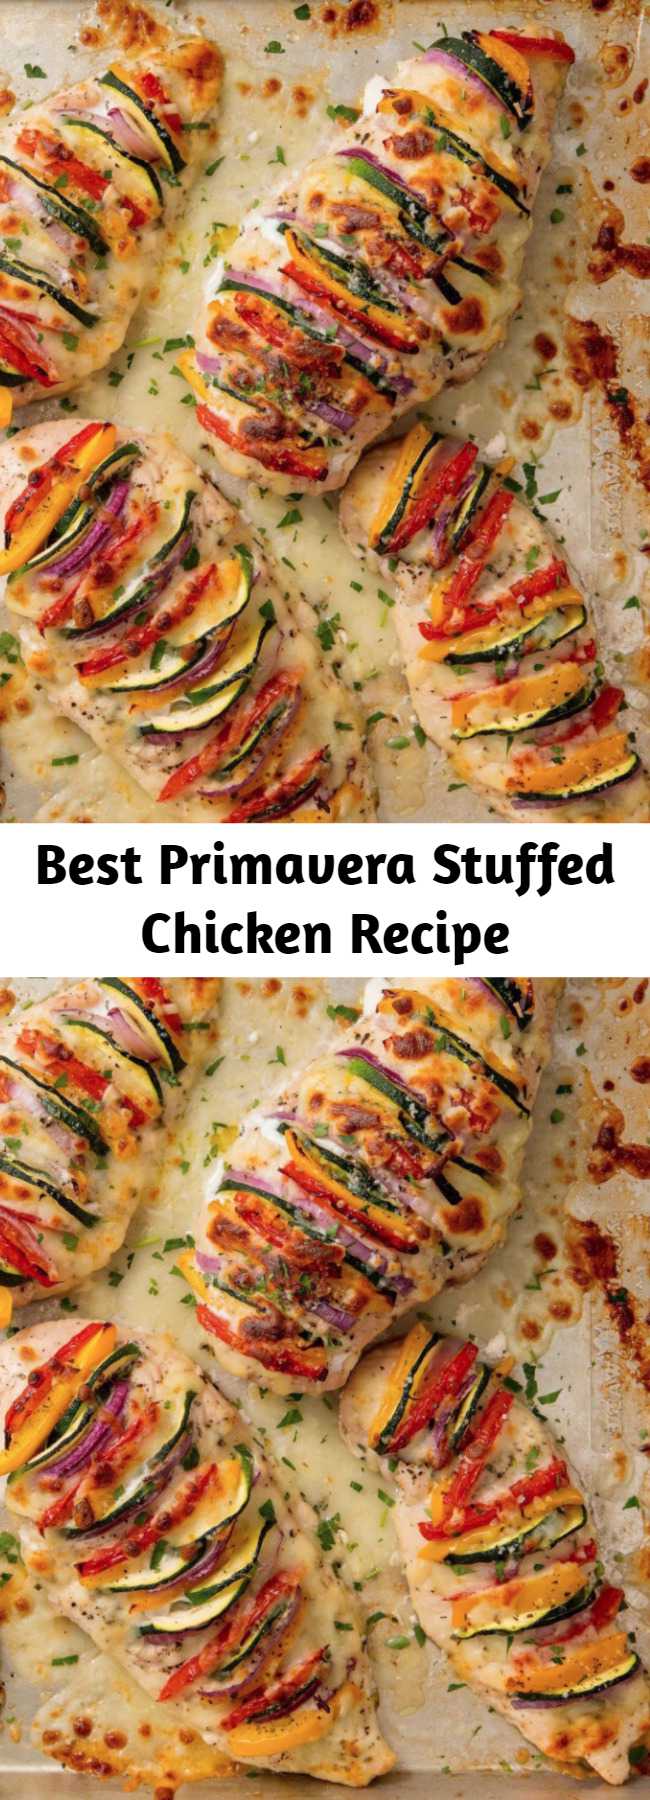 Best Primavera Stuffed Chicken Recipe - This is the opposite of boring, flavorless chicken breast. It's literally packed with colorful flavor. Bonus: It's insanely good for you! It's sooo pretty.